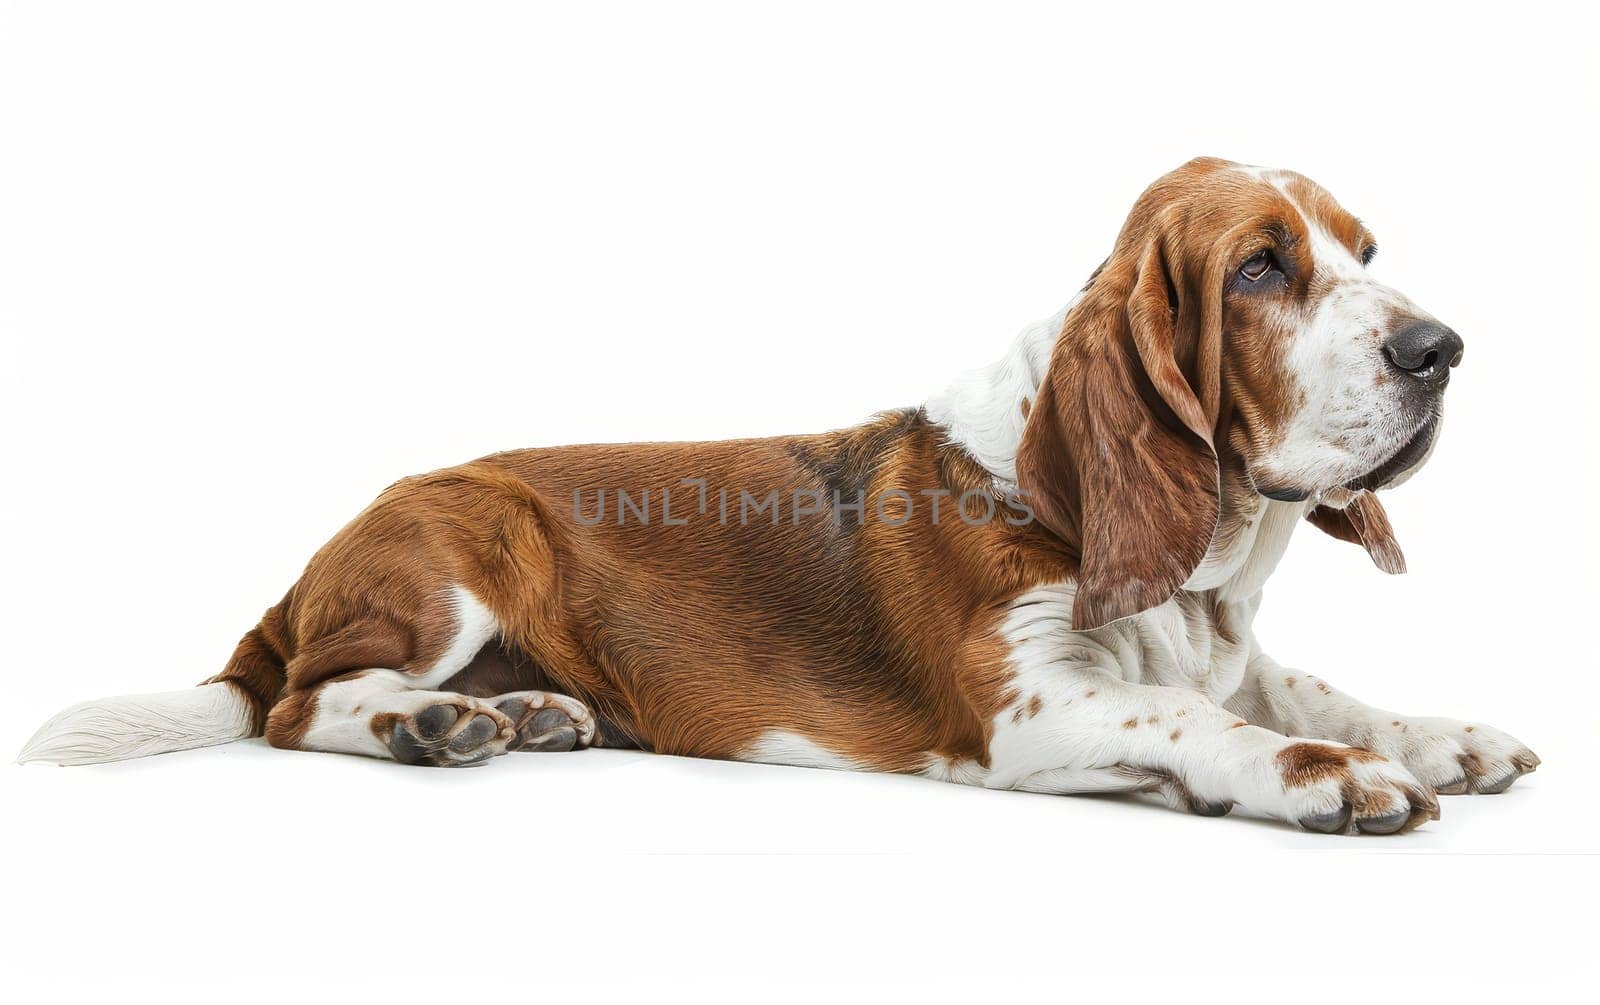 A serene Basset Hound lies gracefully, its brown and white coat spreading out on the floor. The dog's calm demeanor is a picture of tranquility